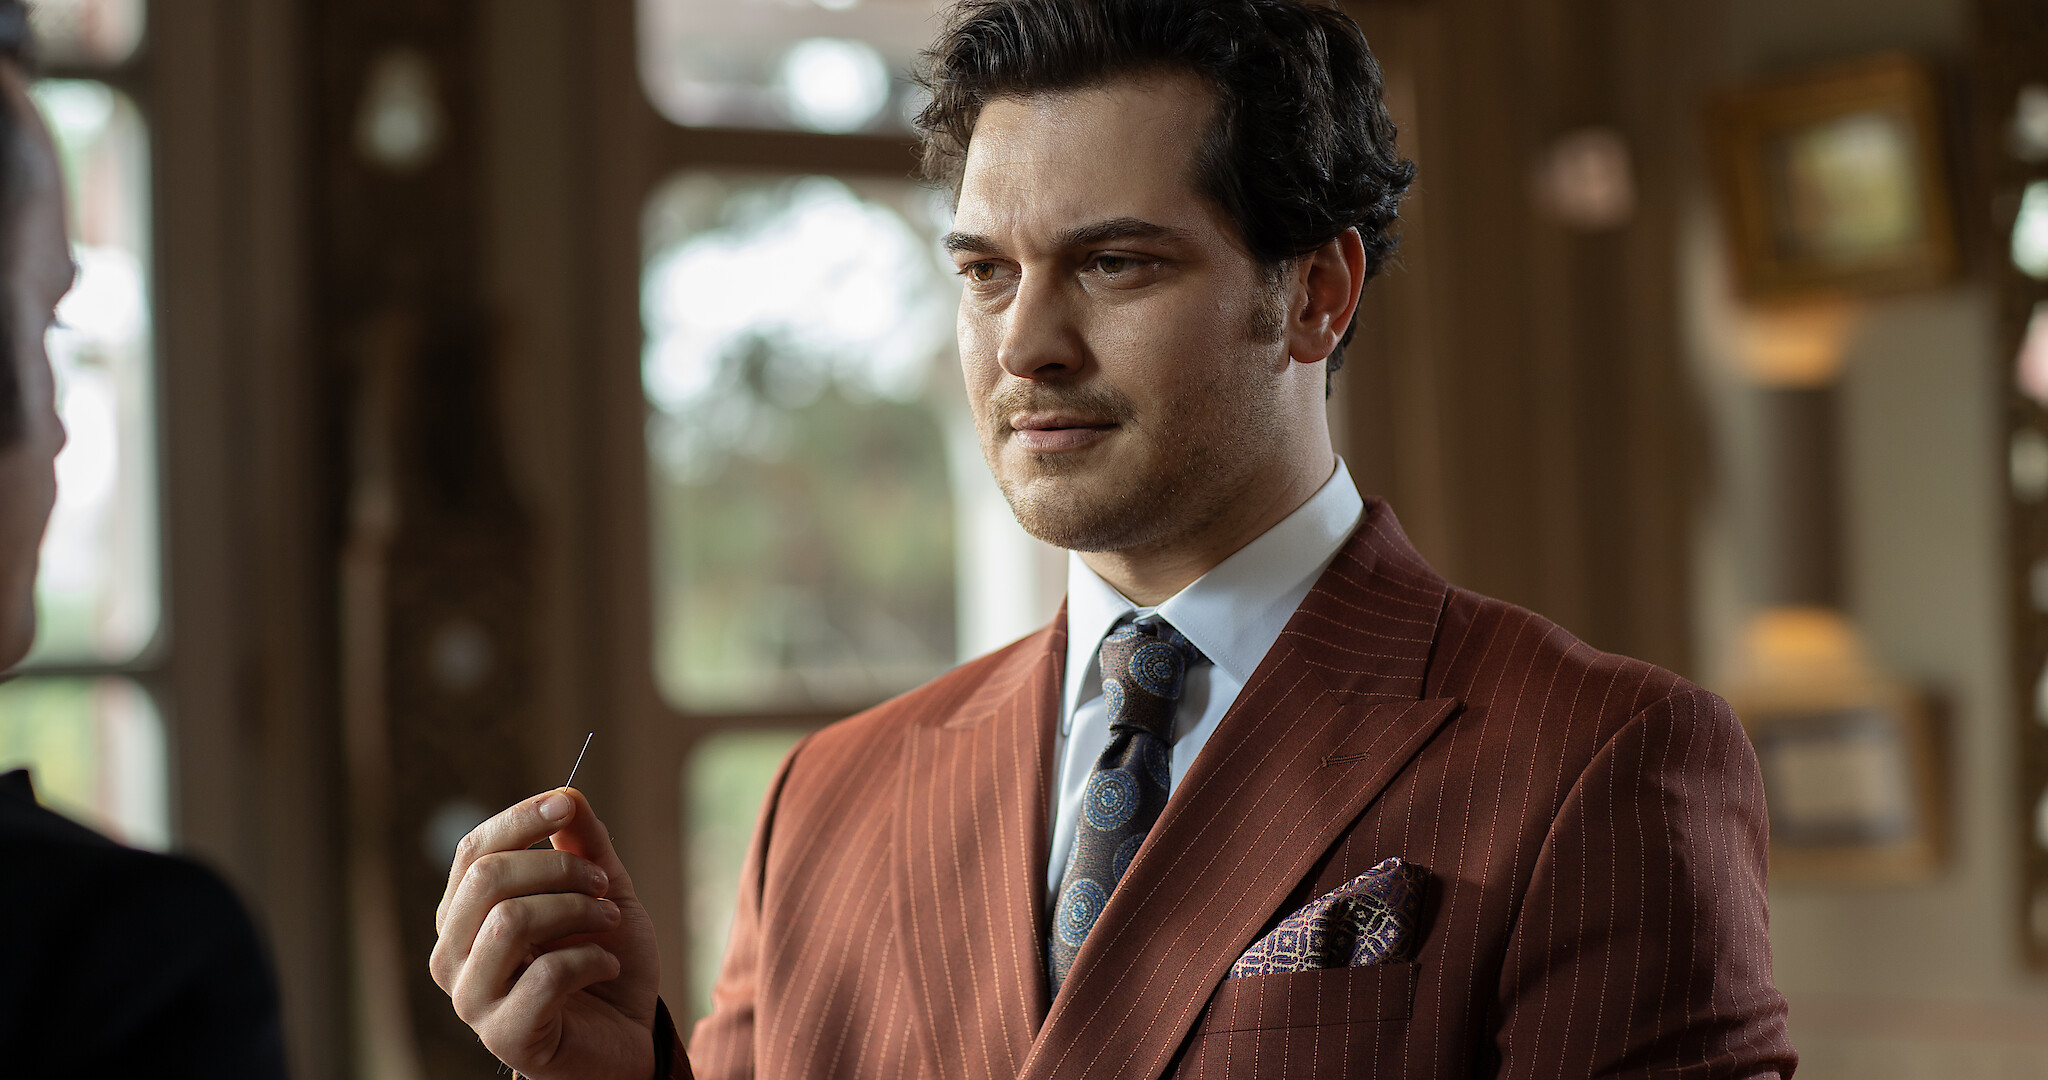 The Tailor Everything You Need to Know About the Turkish Drama photo